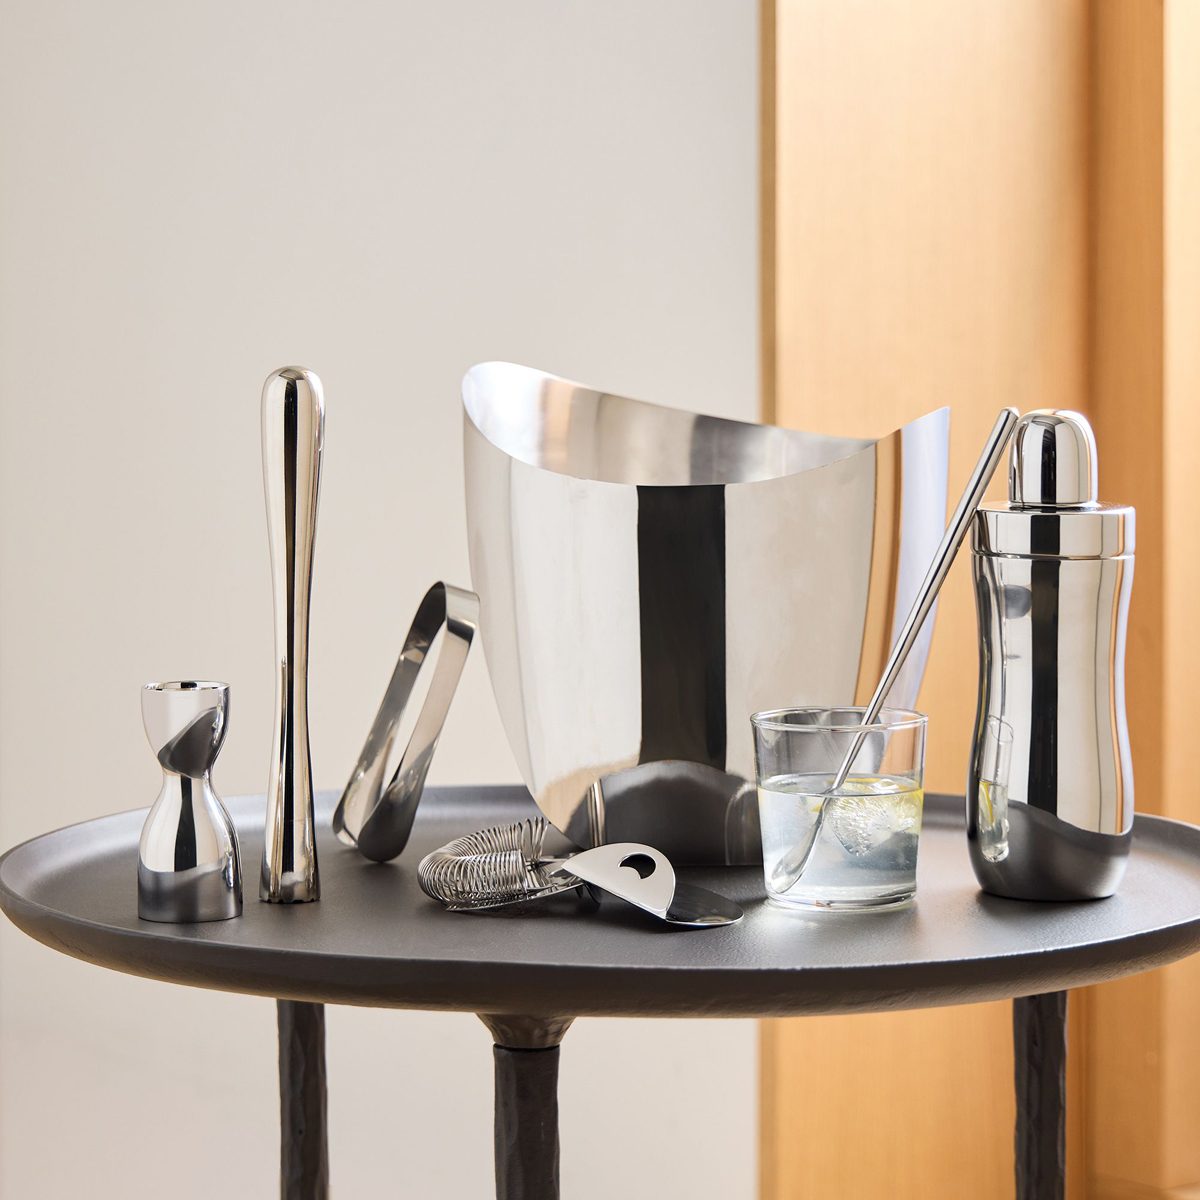 Organic Stainless Steel Barware Collection Ecomm Westelm.com